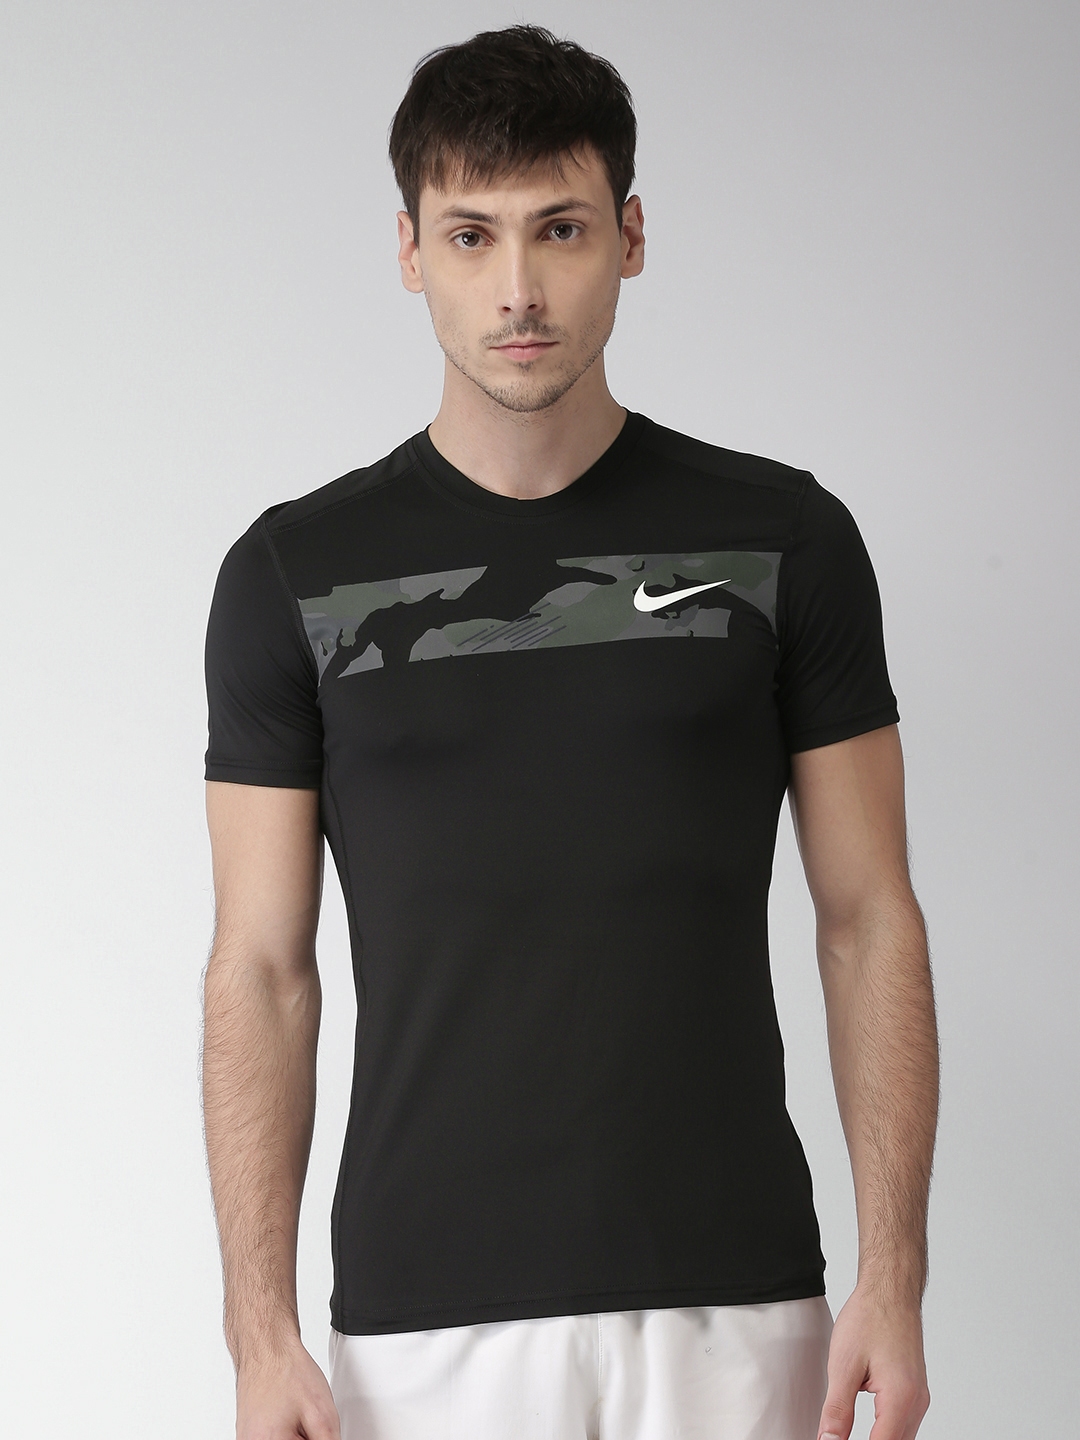 nike muscle fit t shirt